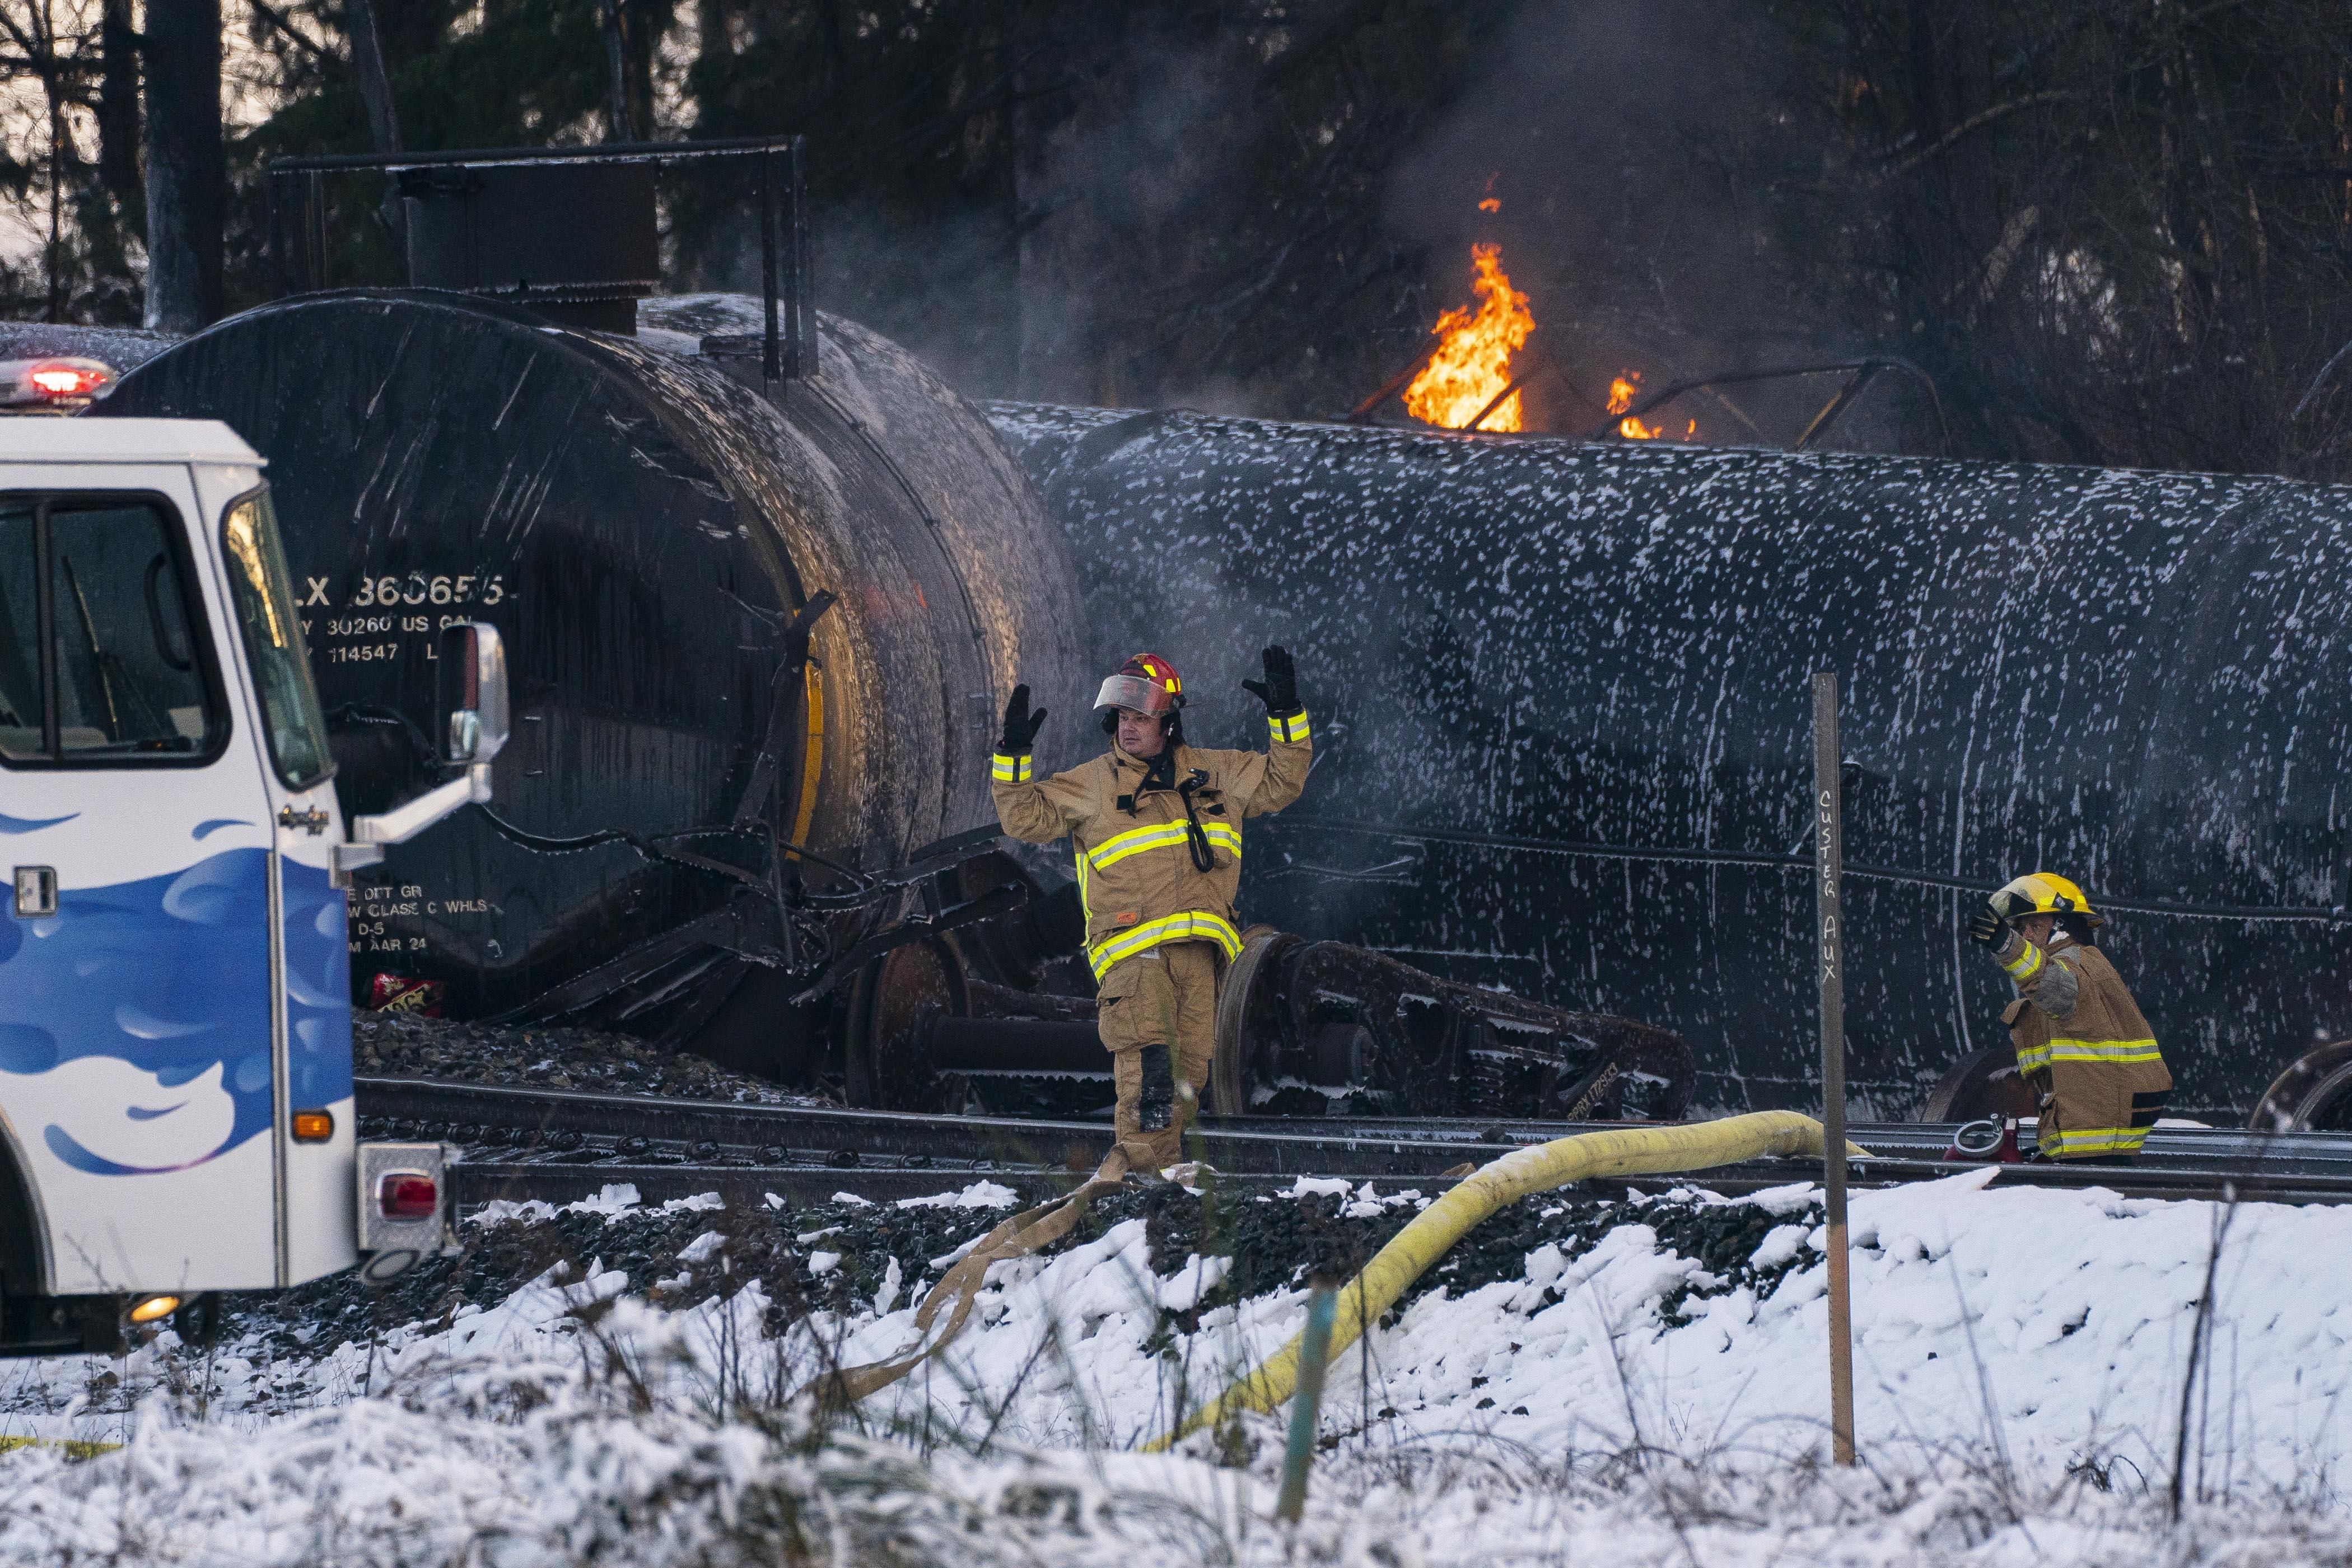 Firefighters respond after a train carrying crude oil derailed on December 22, 2020 in Custer, Washington.